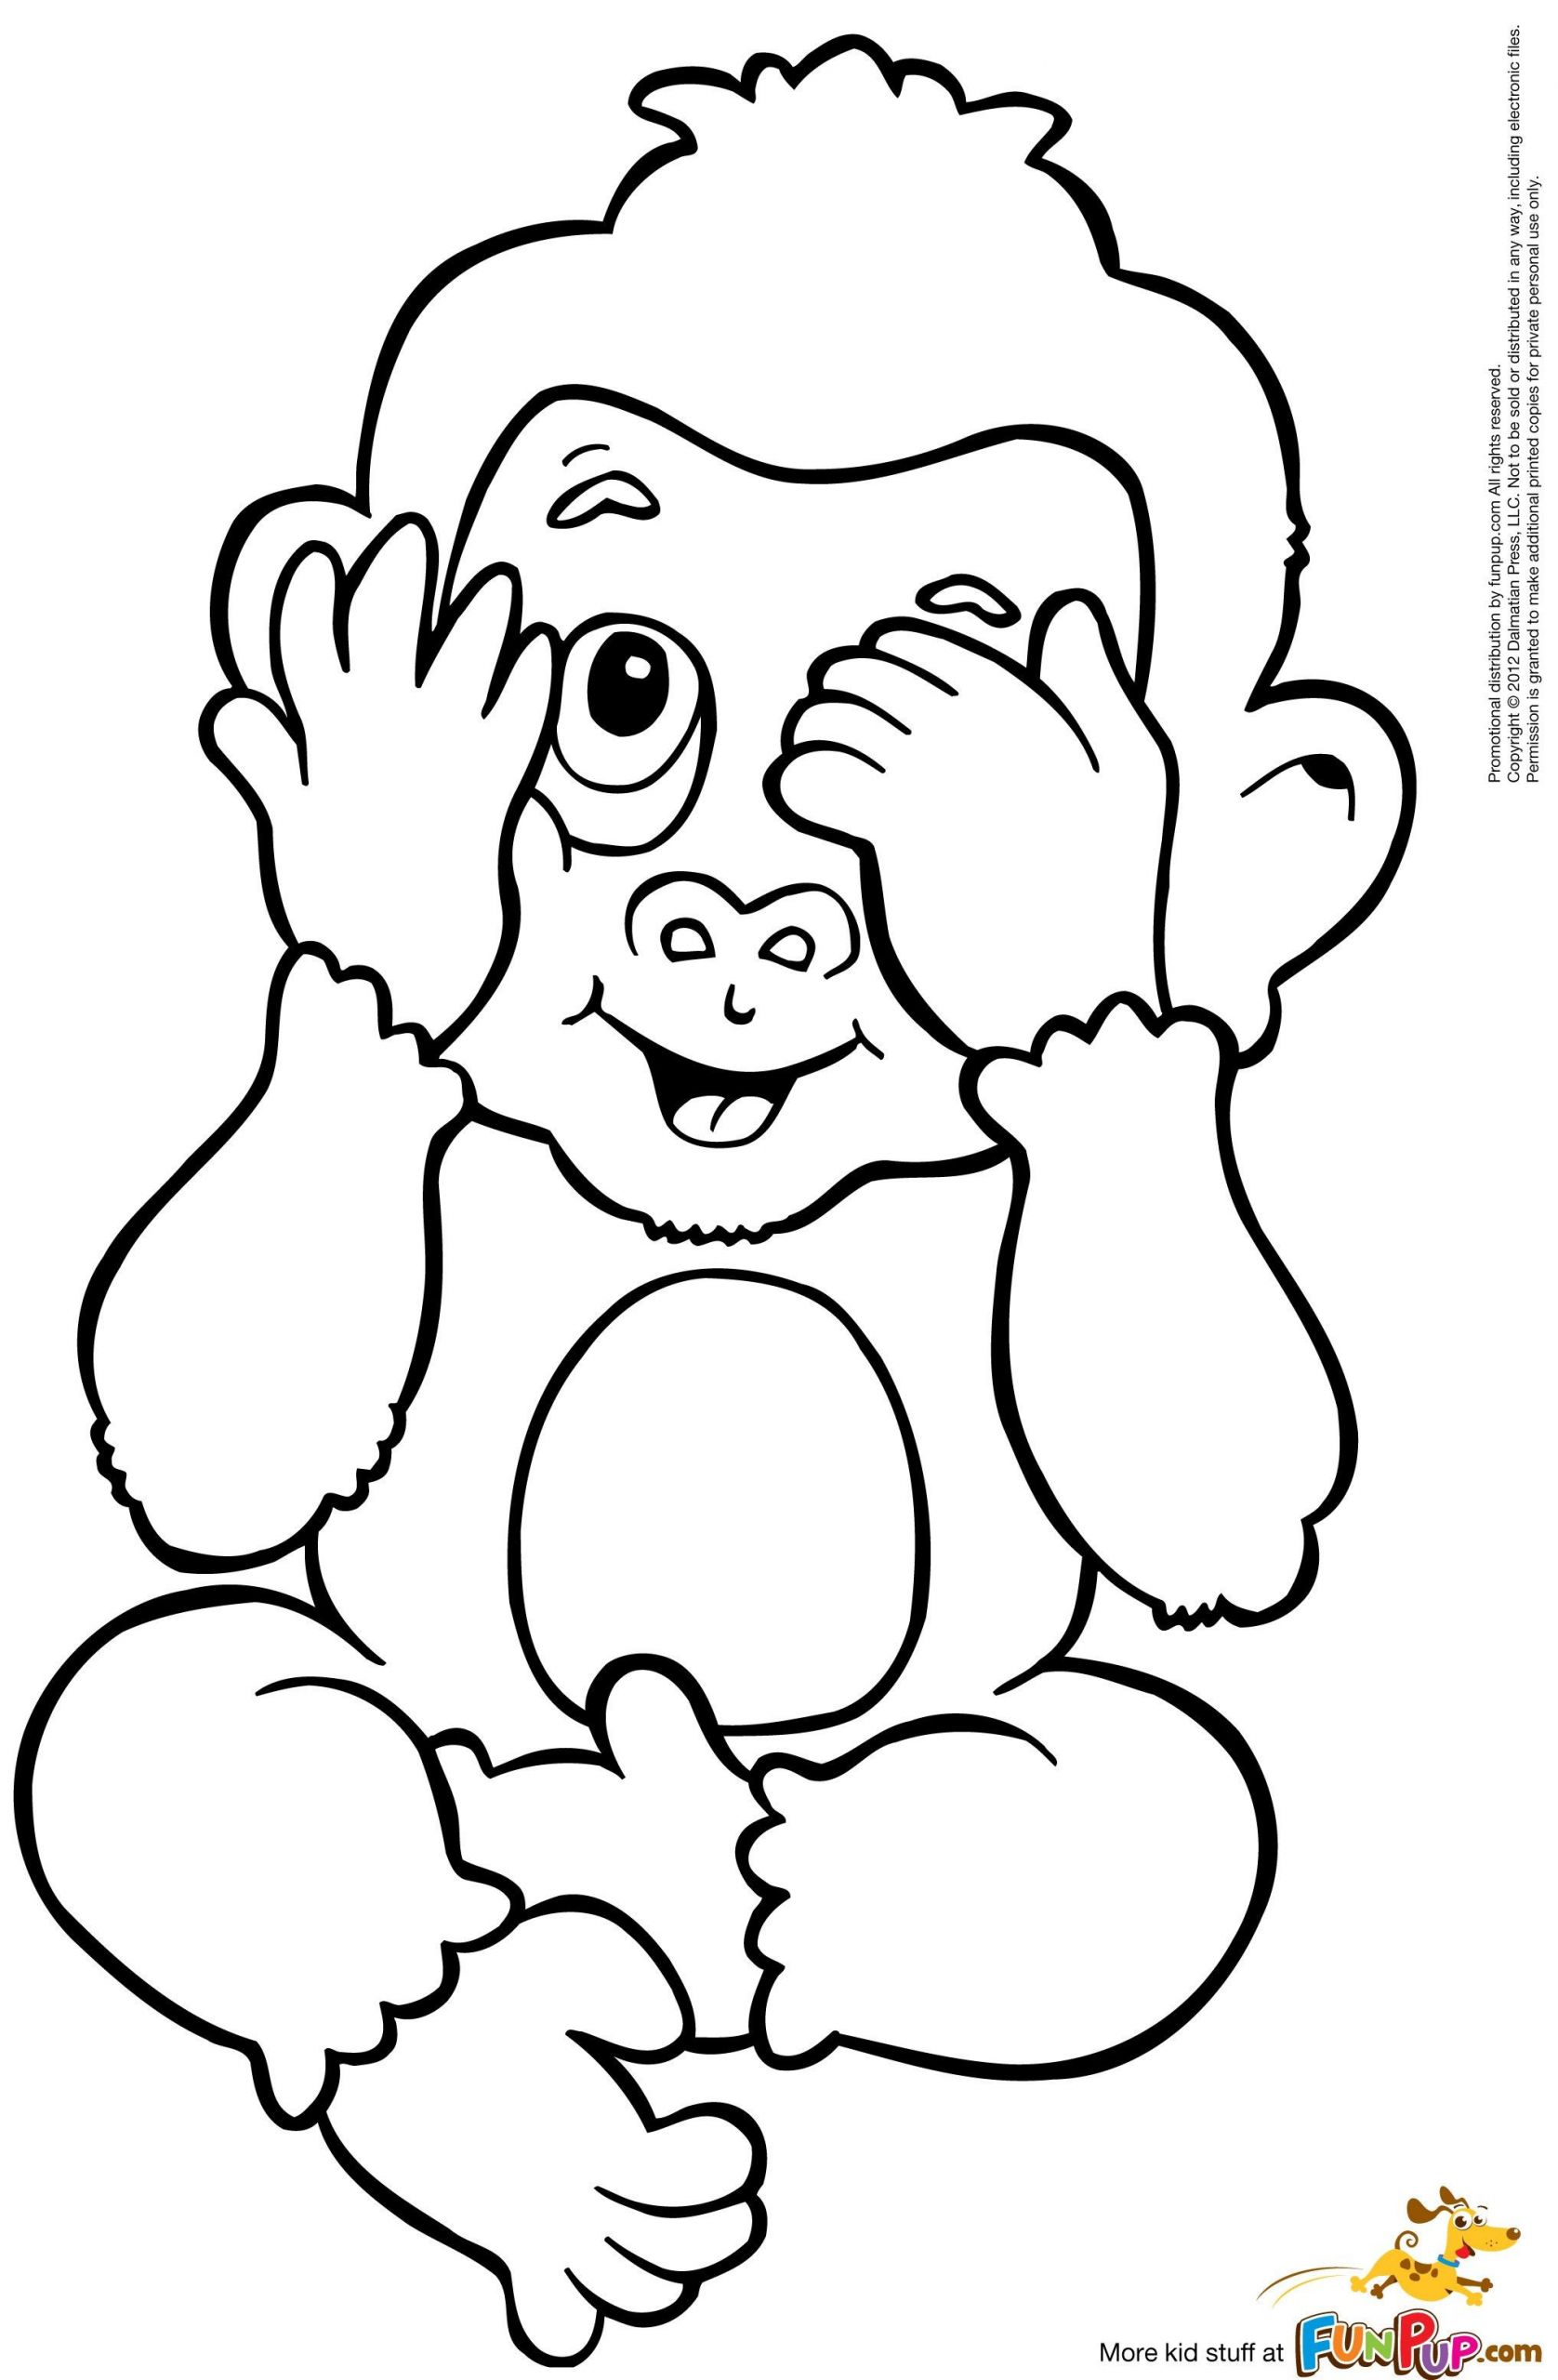 Cute Baby Owl Coloring Pages
 Cute Baby Owl Coloring Pages